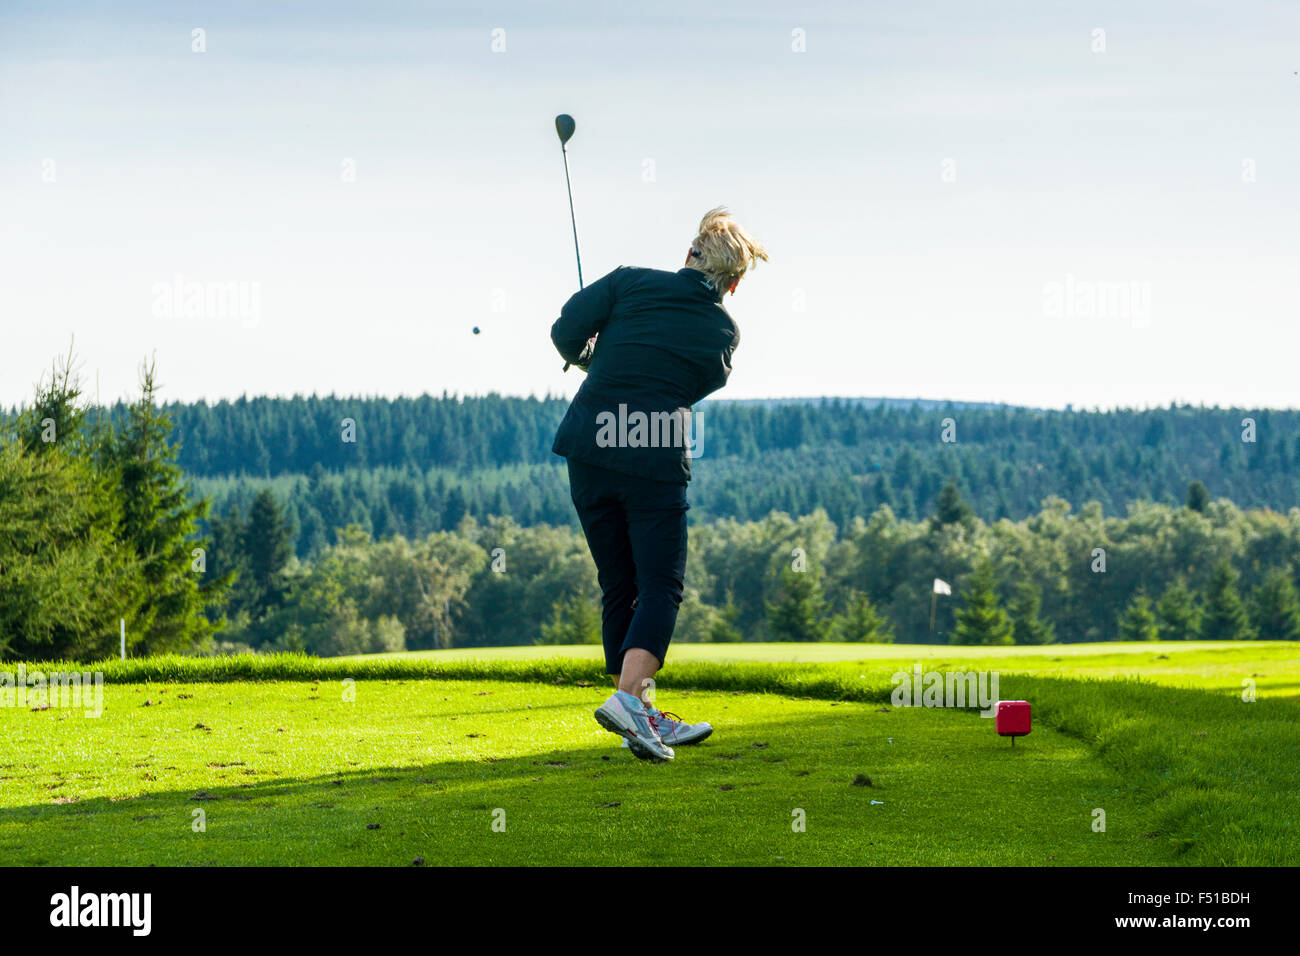 A woman is playing golf on a green meadow Stock Photo